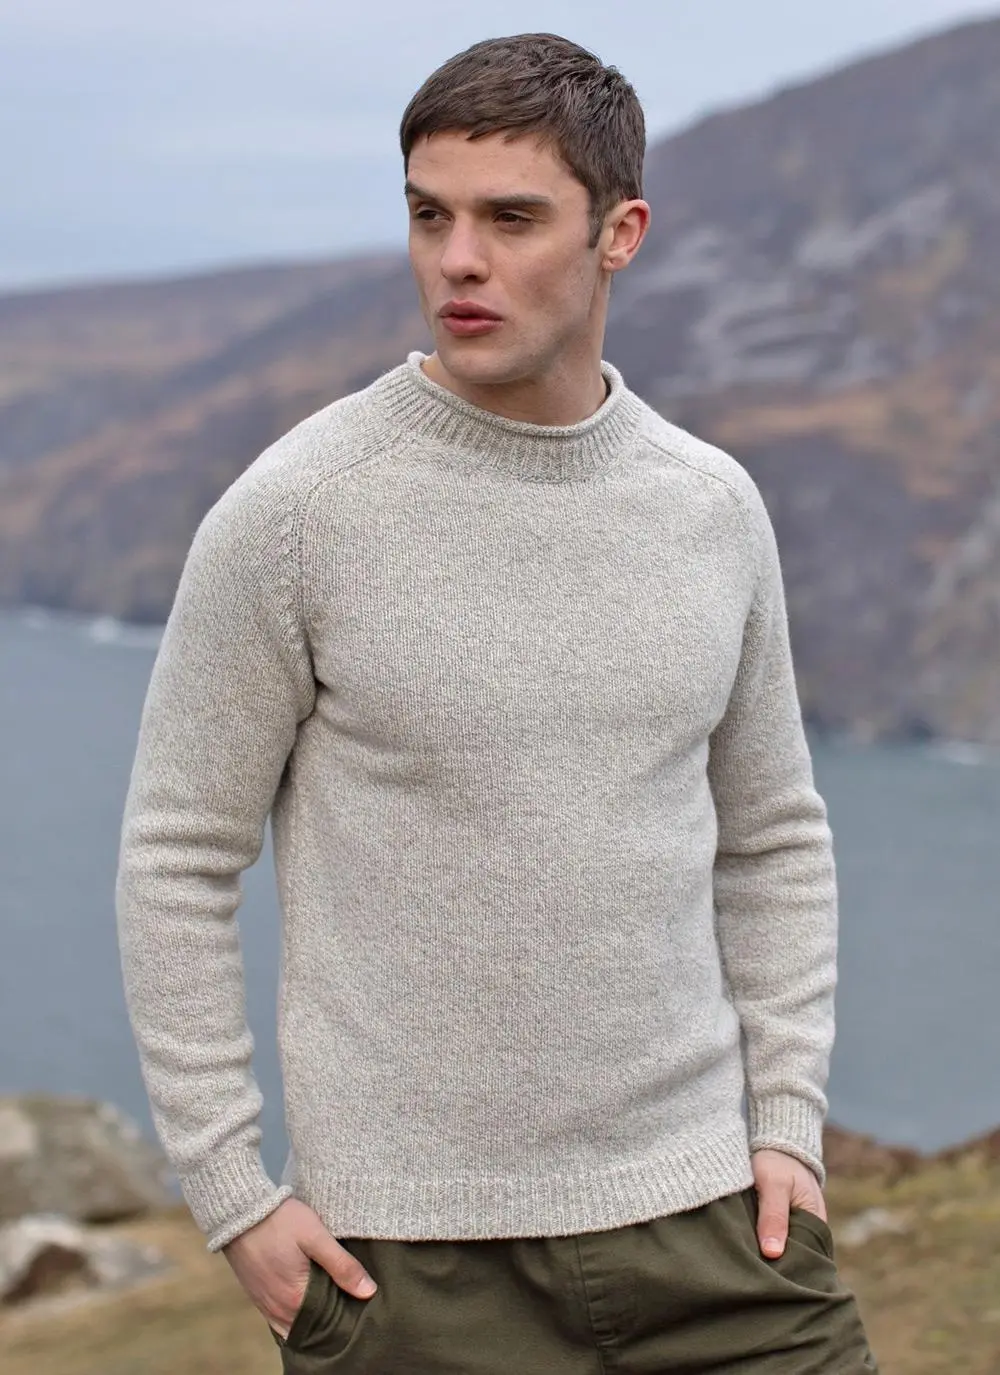 Fisherman Roll Neck Sweater With Cashmere in Muesli